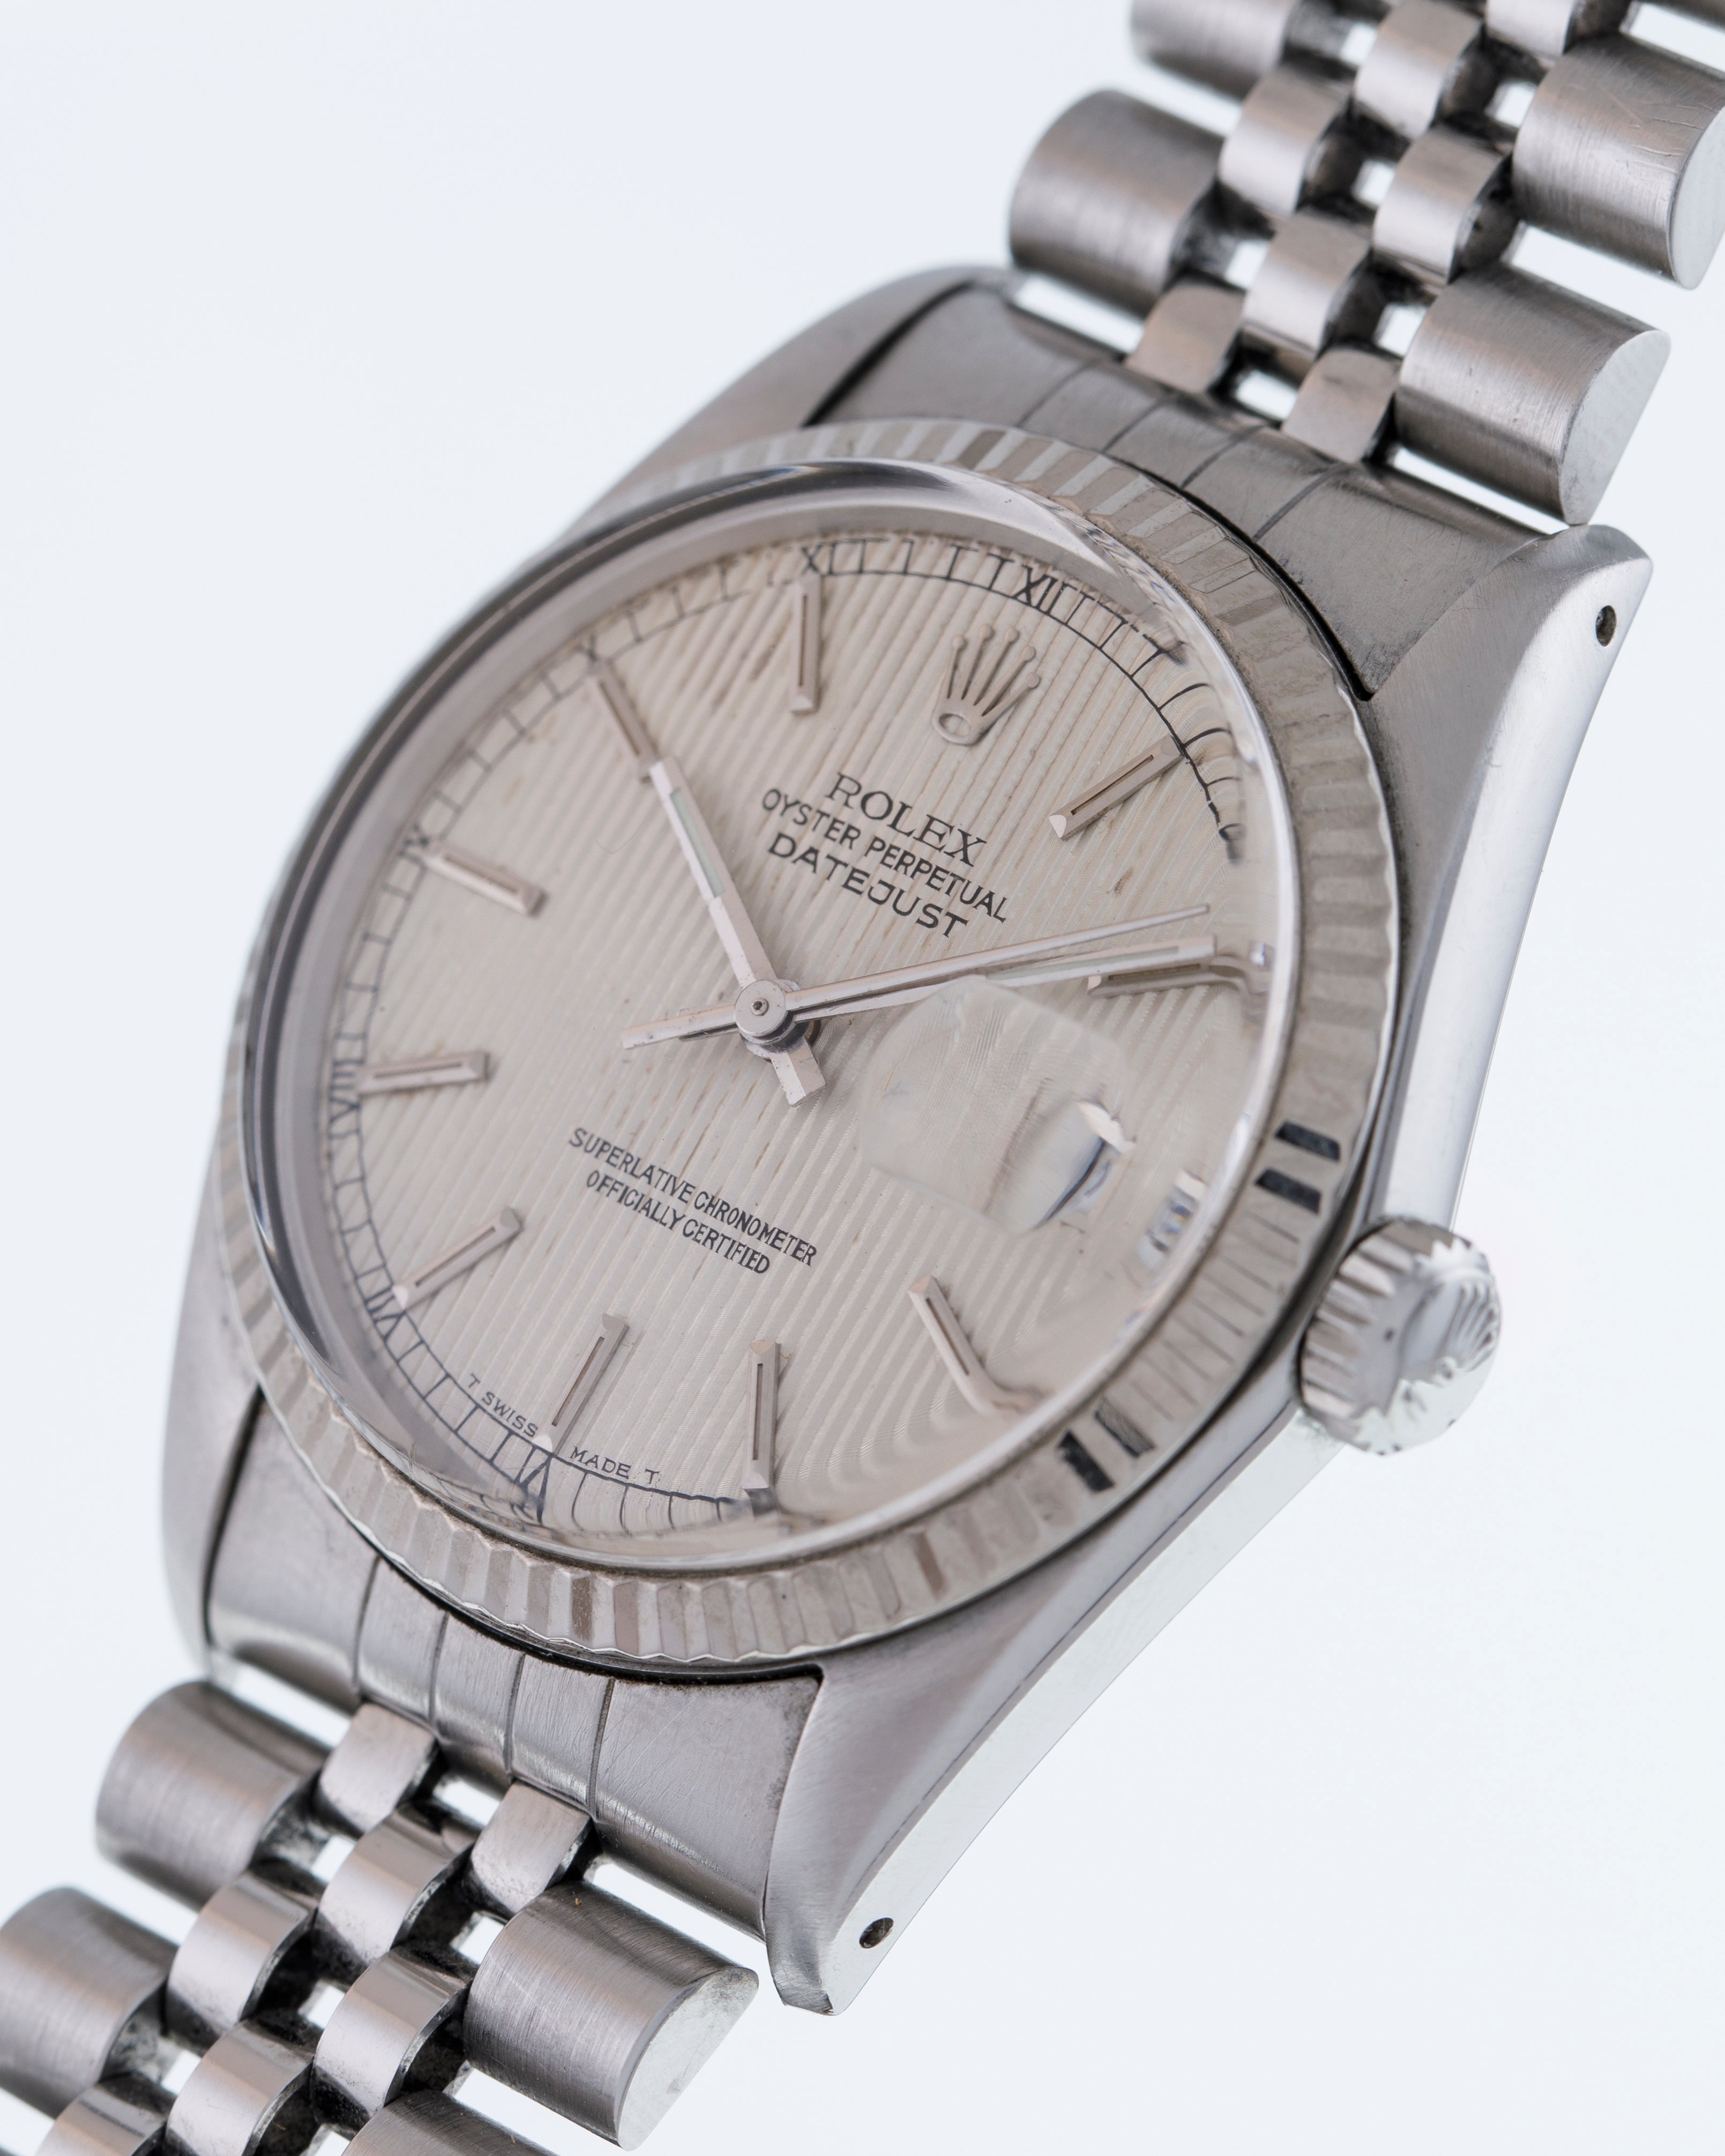 Rolex Oyster Perpetual Datejust tapisseriedial